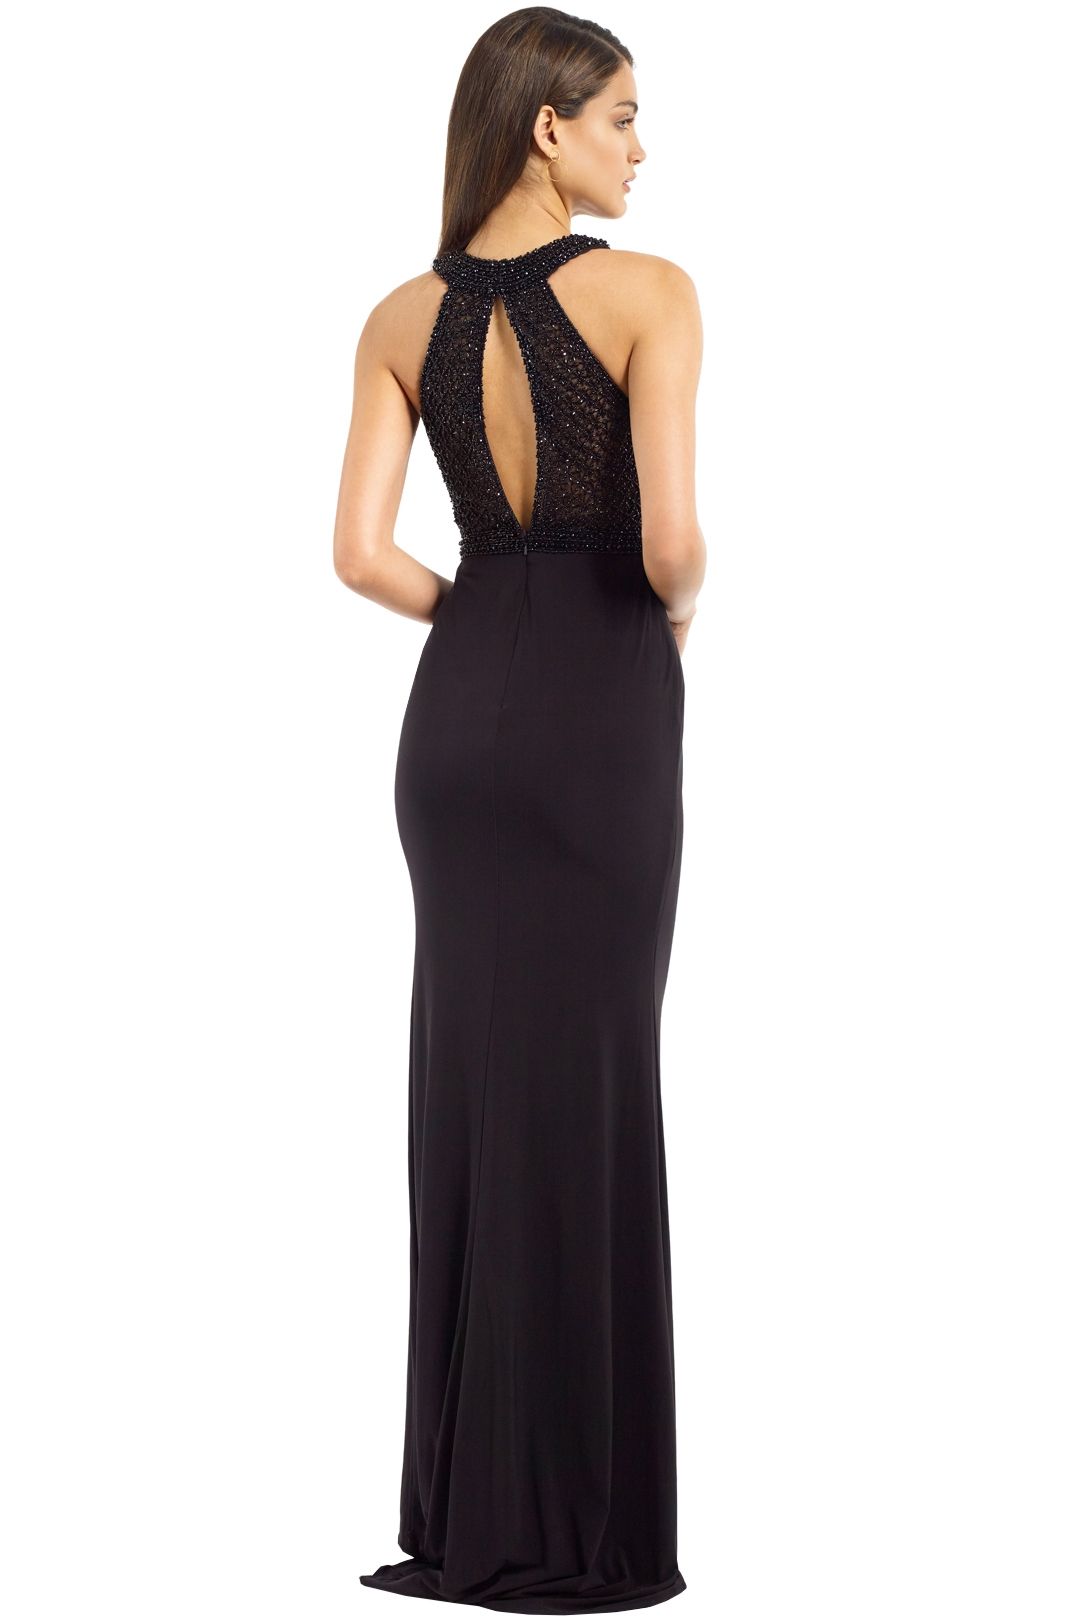 Tyra Gown in Black by Tania Olsen for Hire | GlamCorner